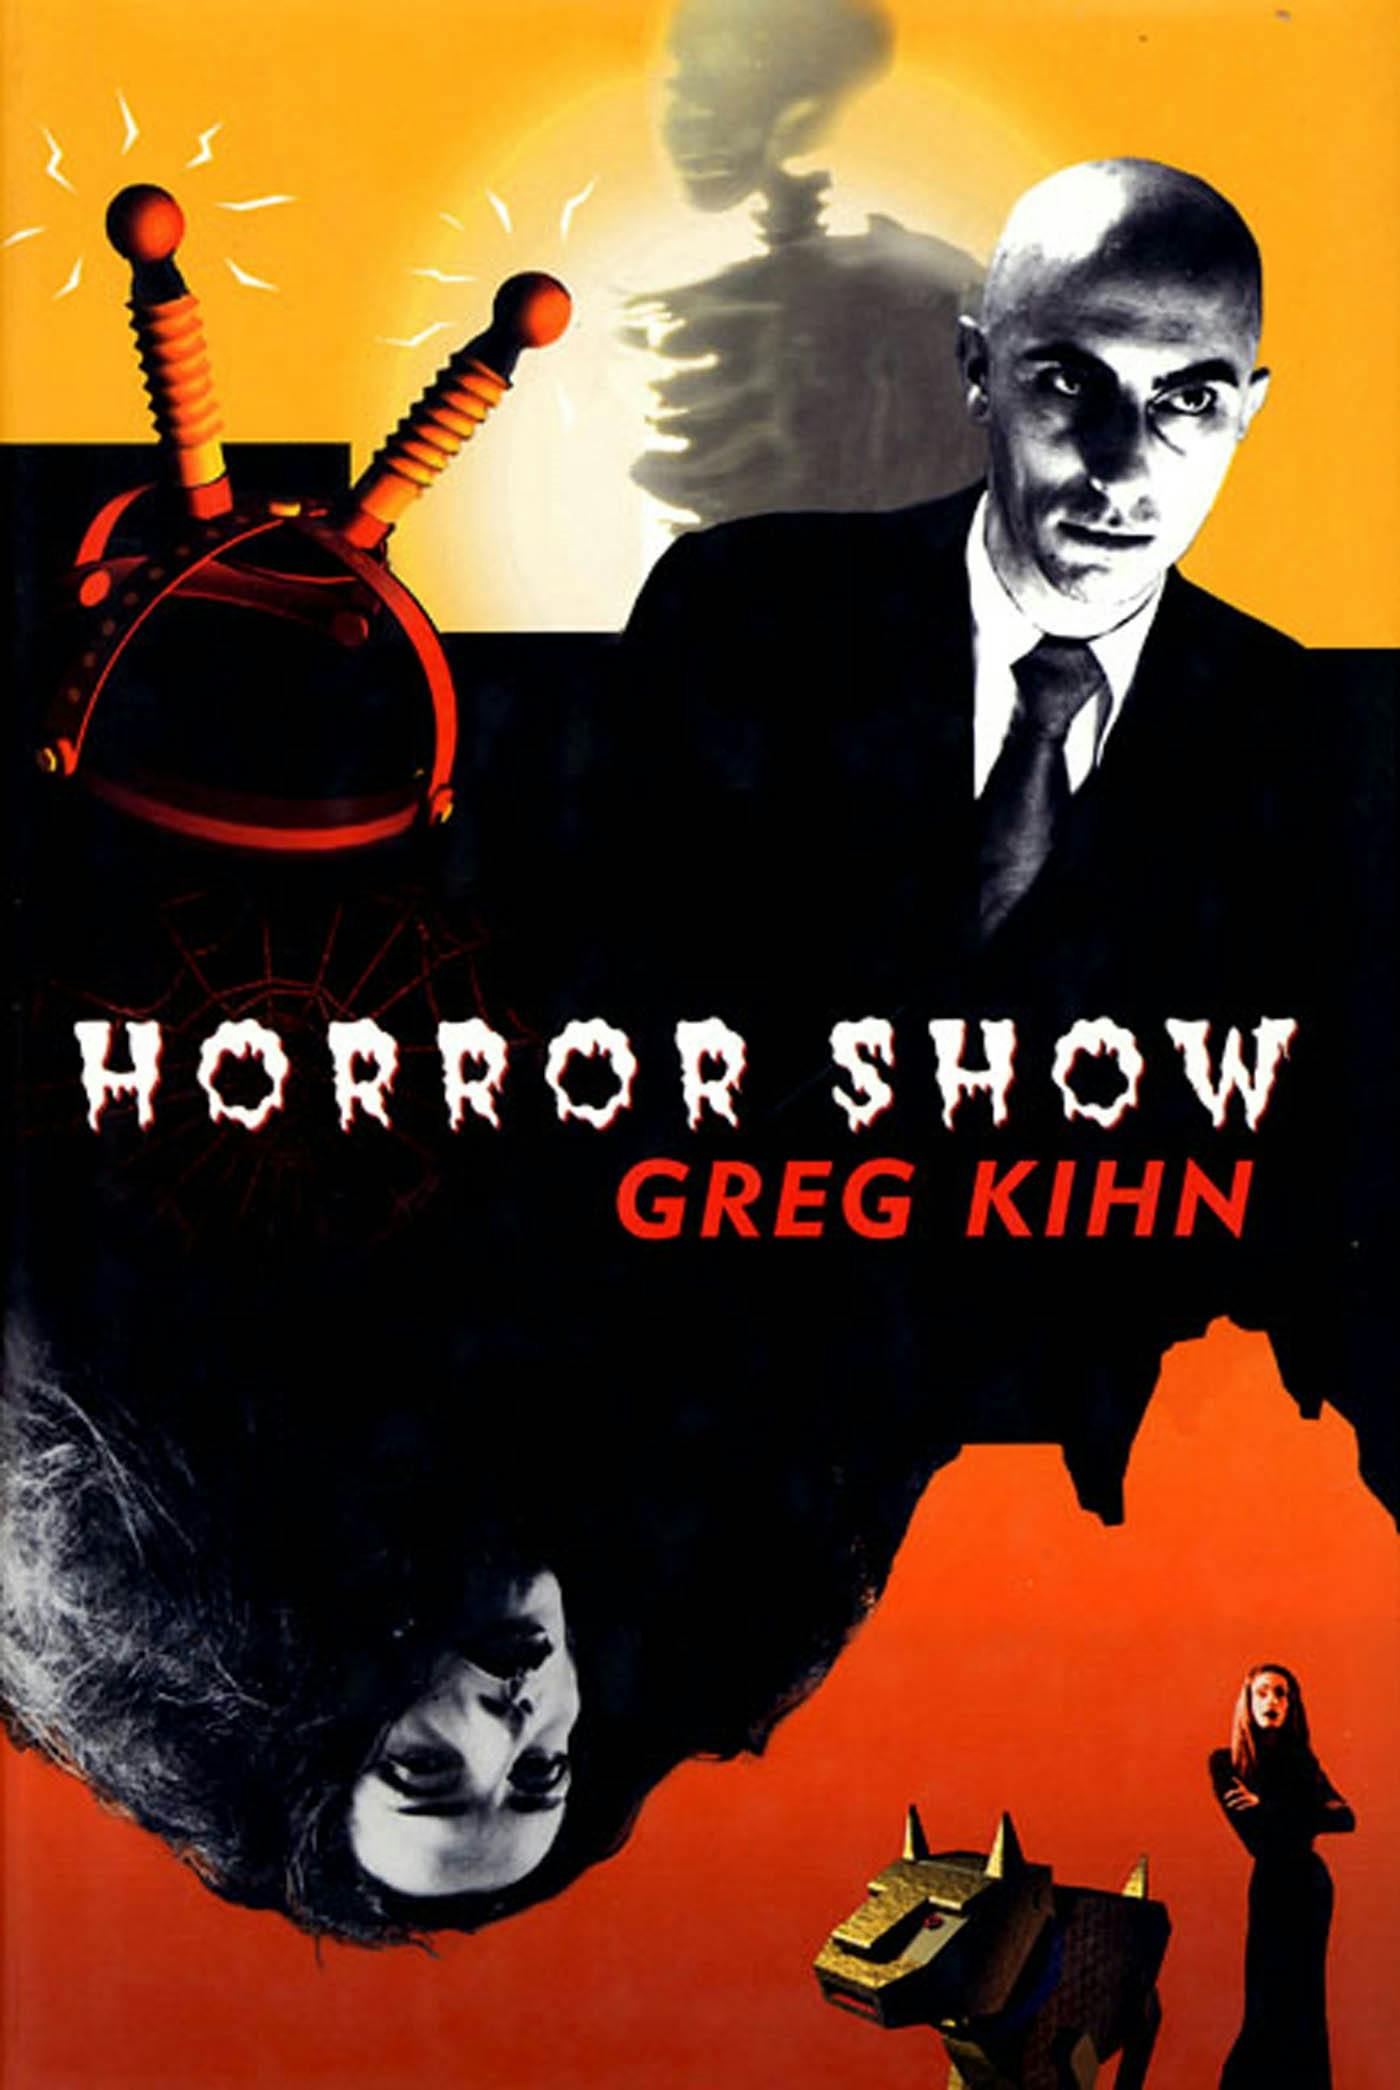 Cover for the book titled as: The Horror Show